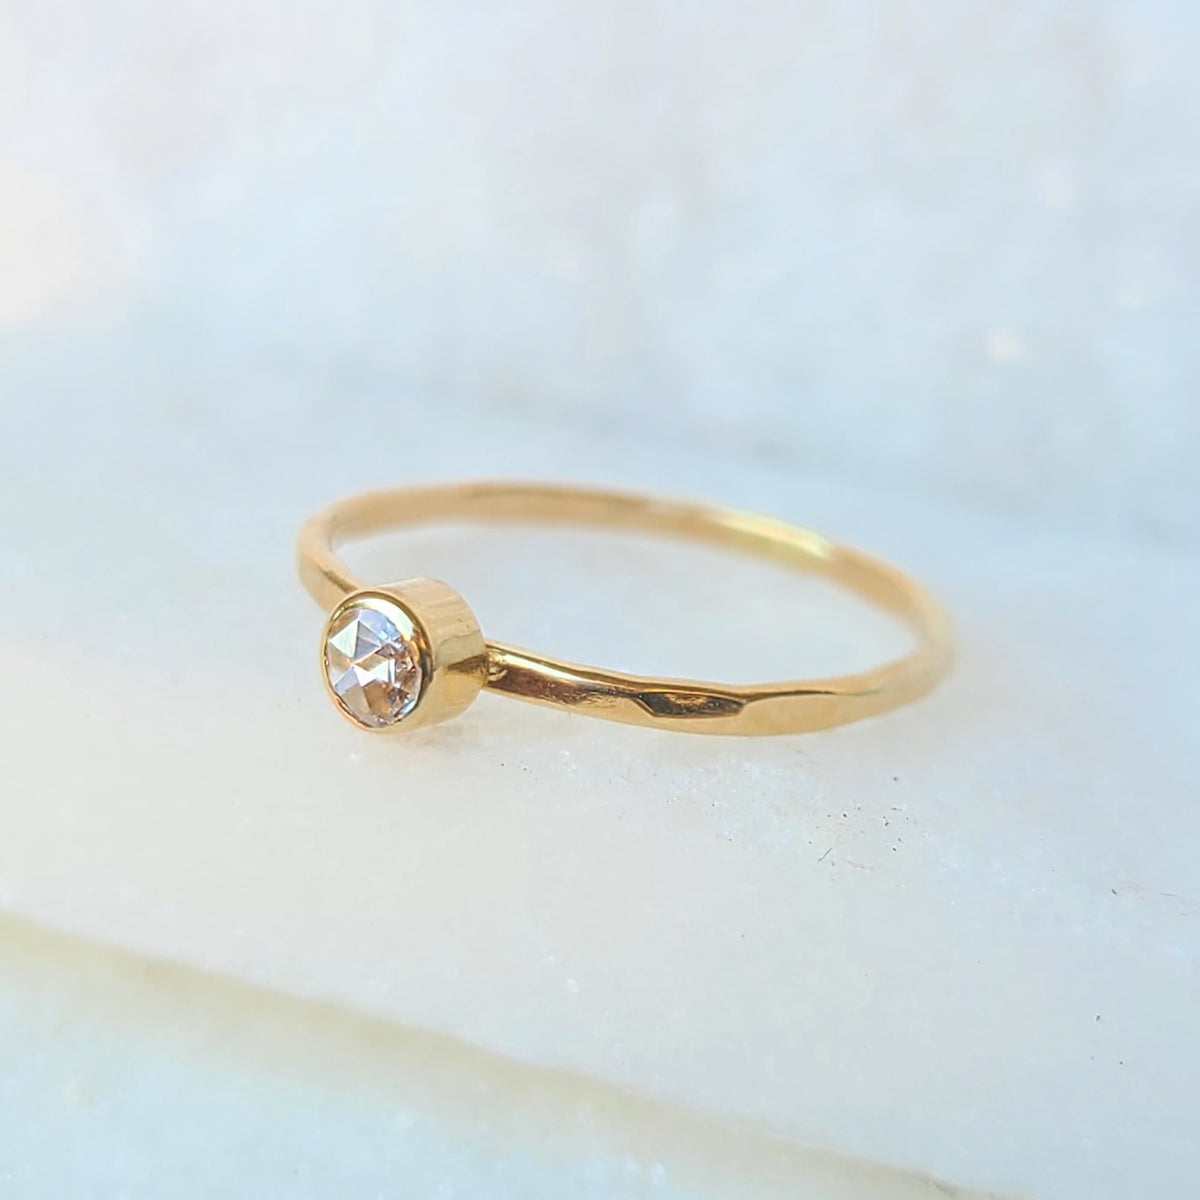 Sincerely Ginger Jewelry 14K Rose Cut White Diamond Stacking Ring in Yellow Gold